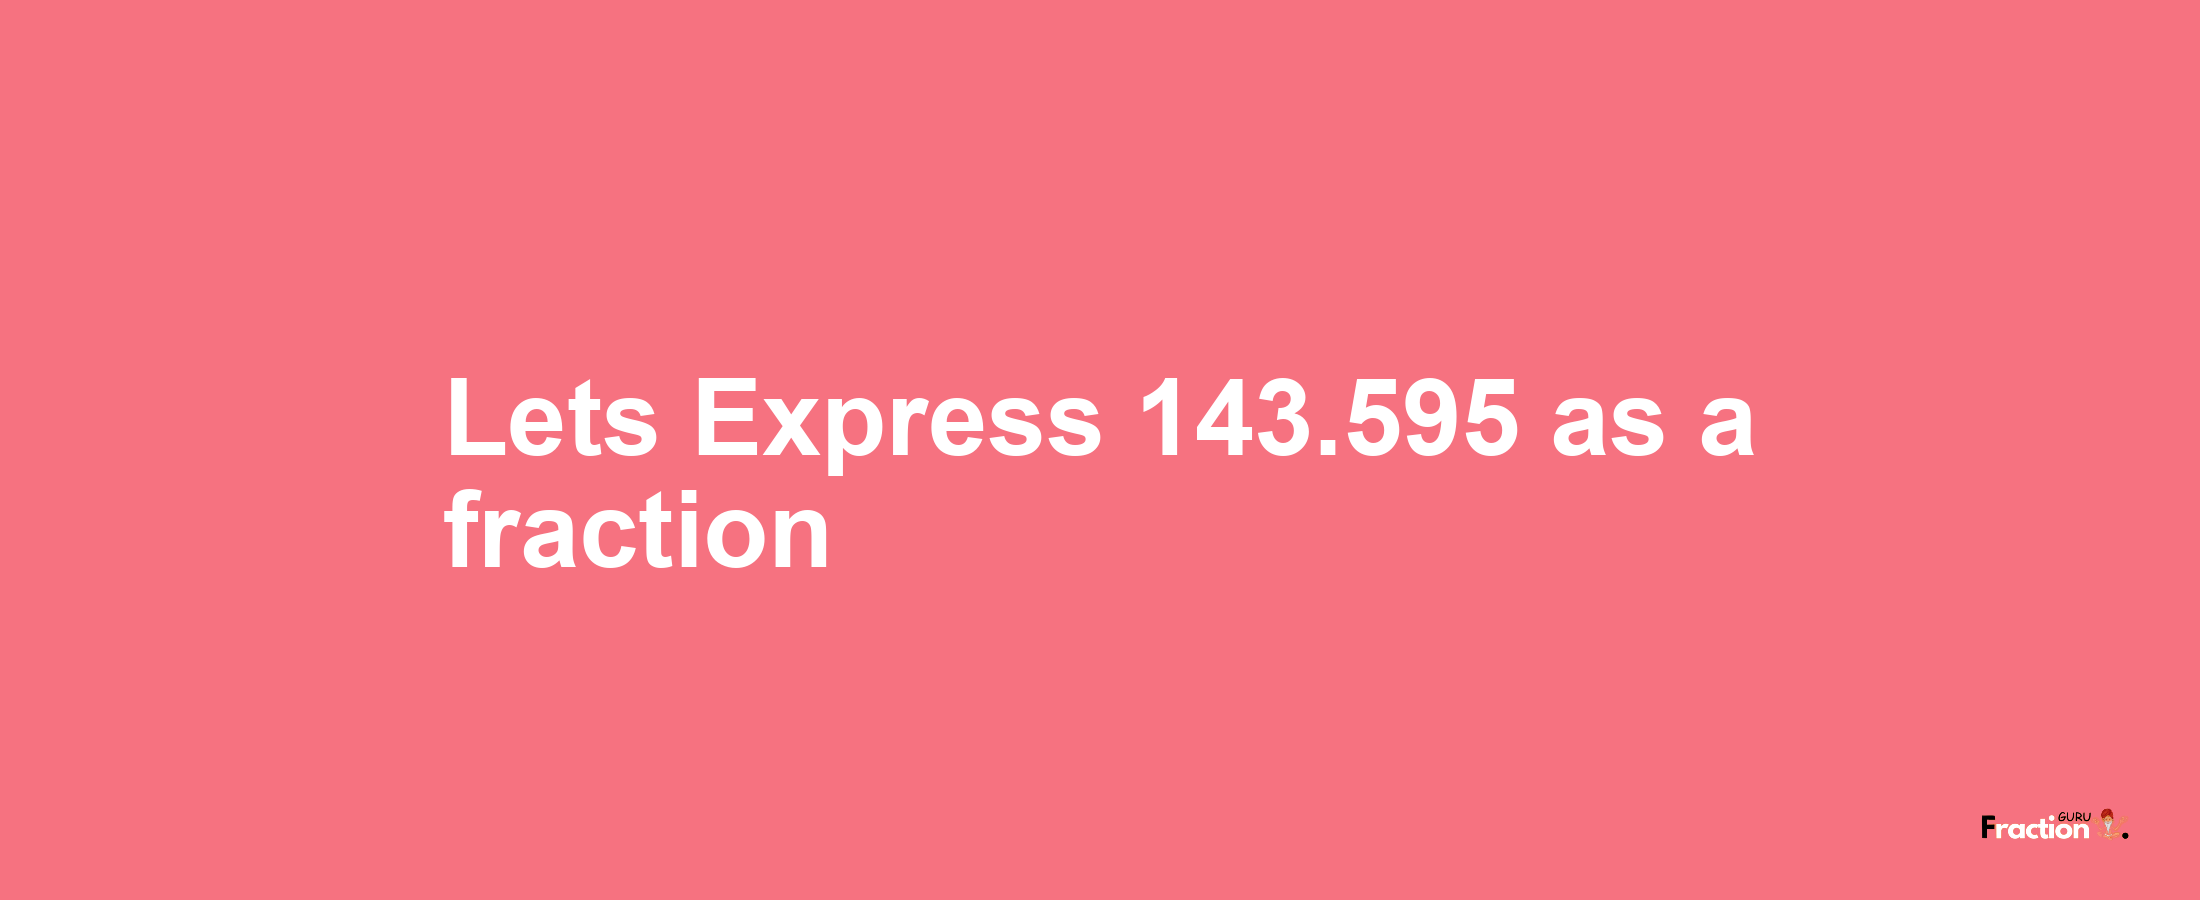 Lets Express 143.595 as afraction